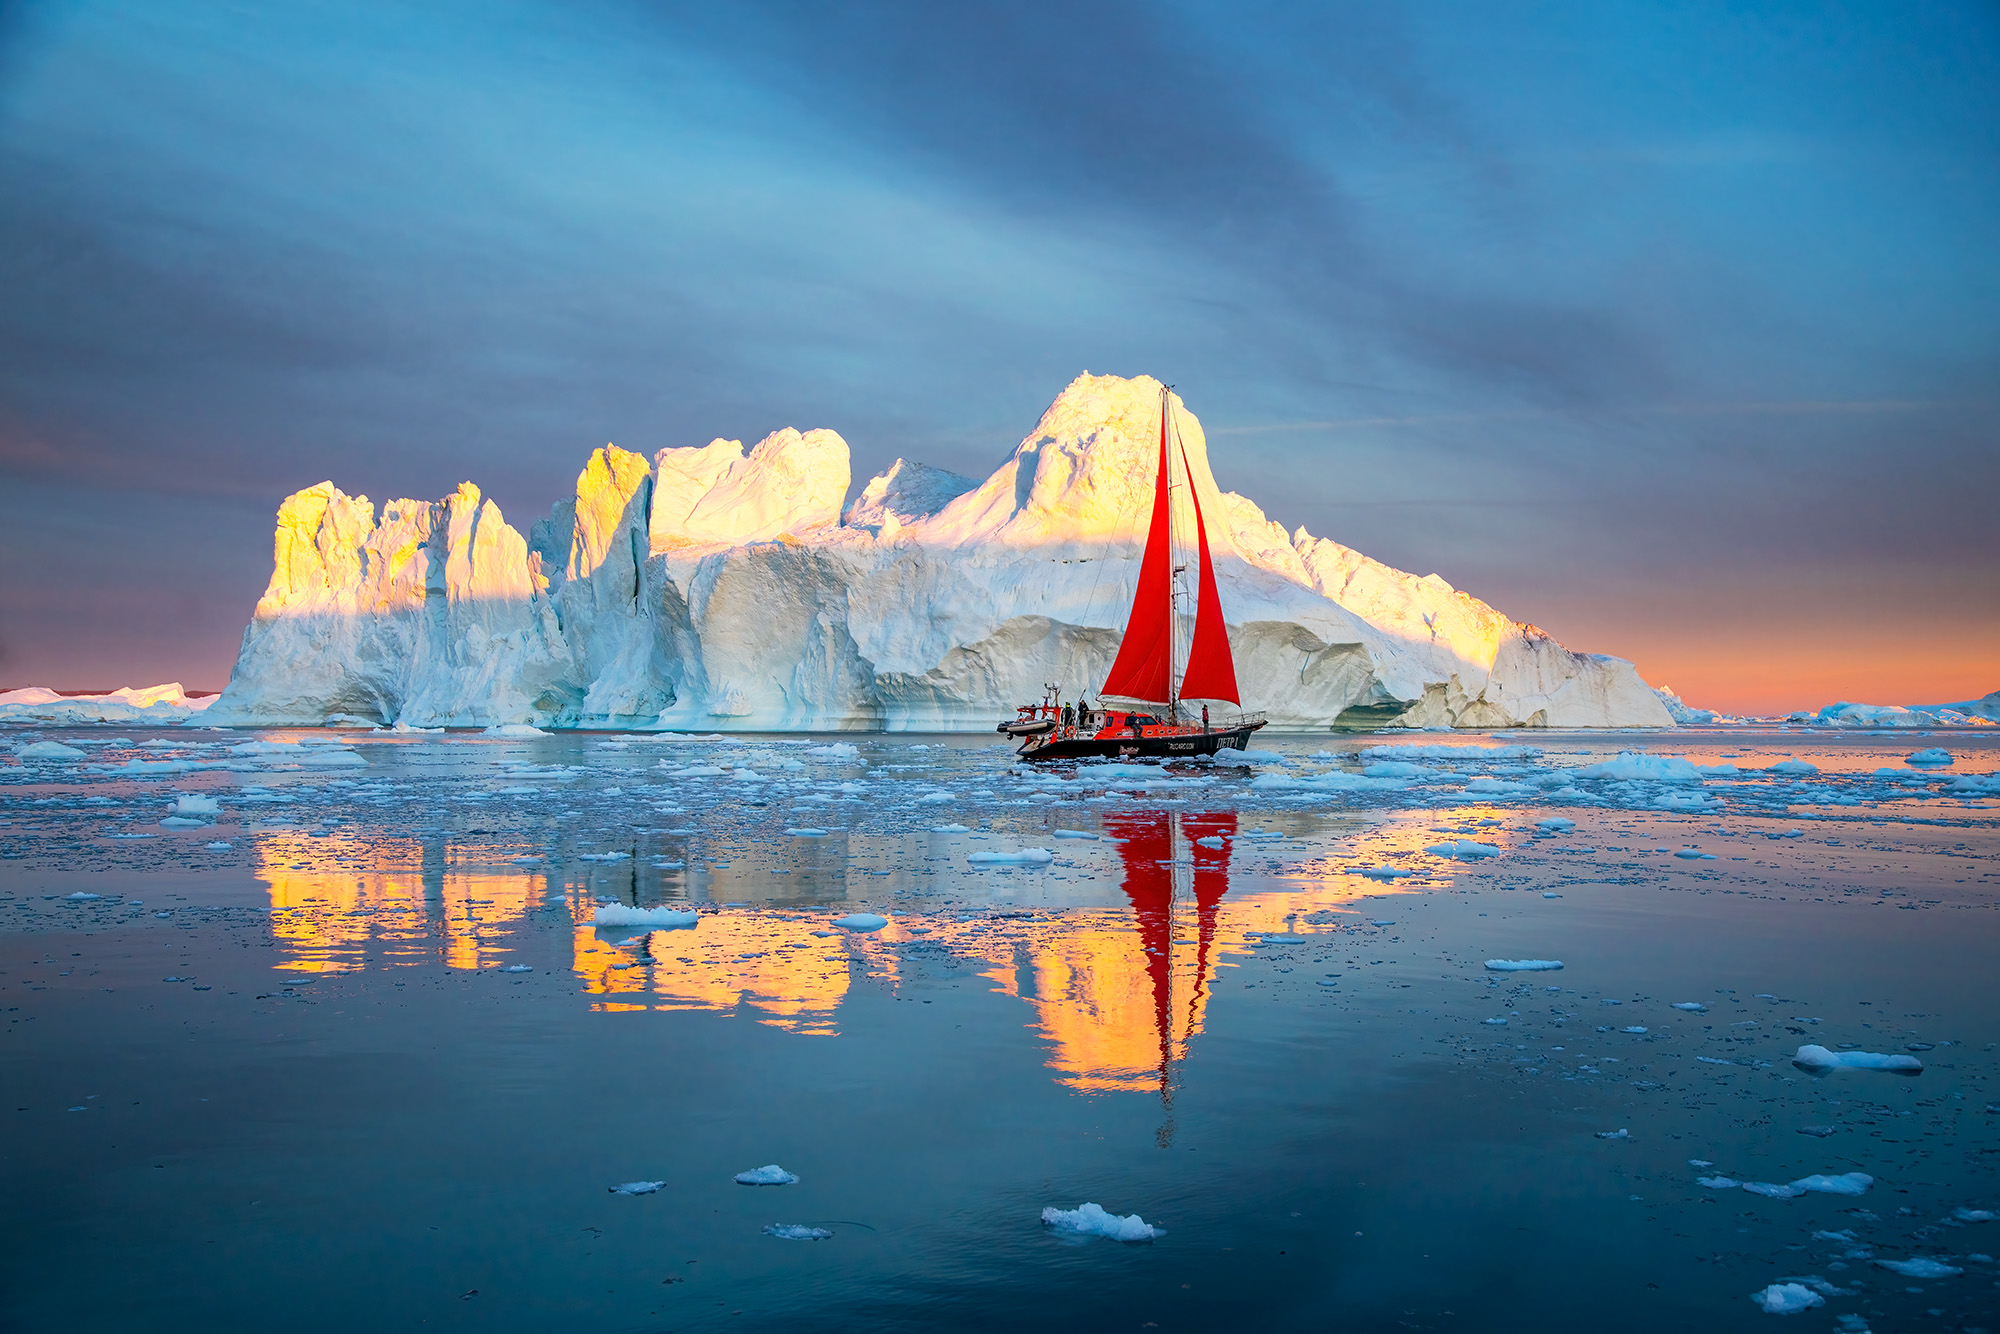 Among my all-time favorite images, this shot captures an iceberg reflecting in Disko Bay, accompanied by a graceful sailboat...